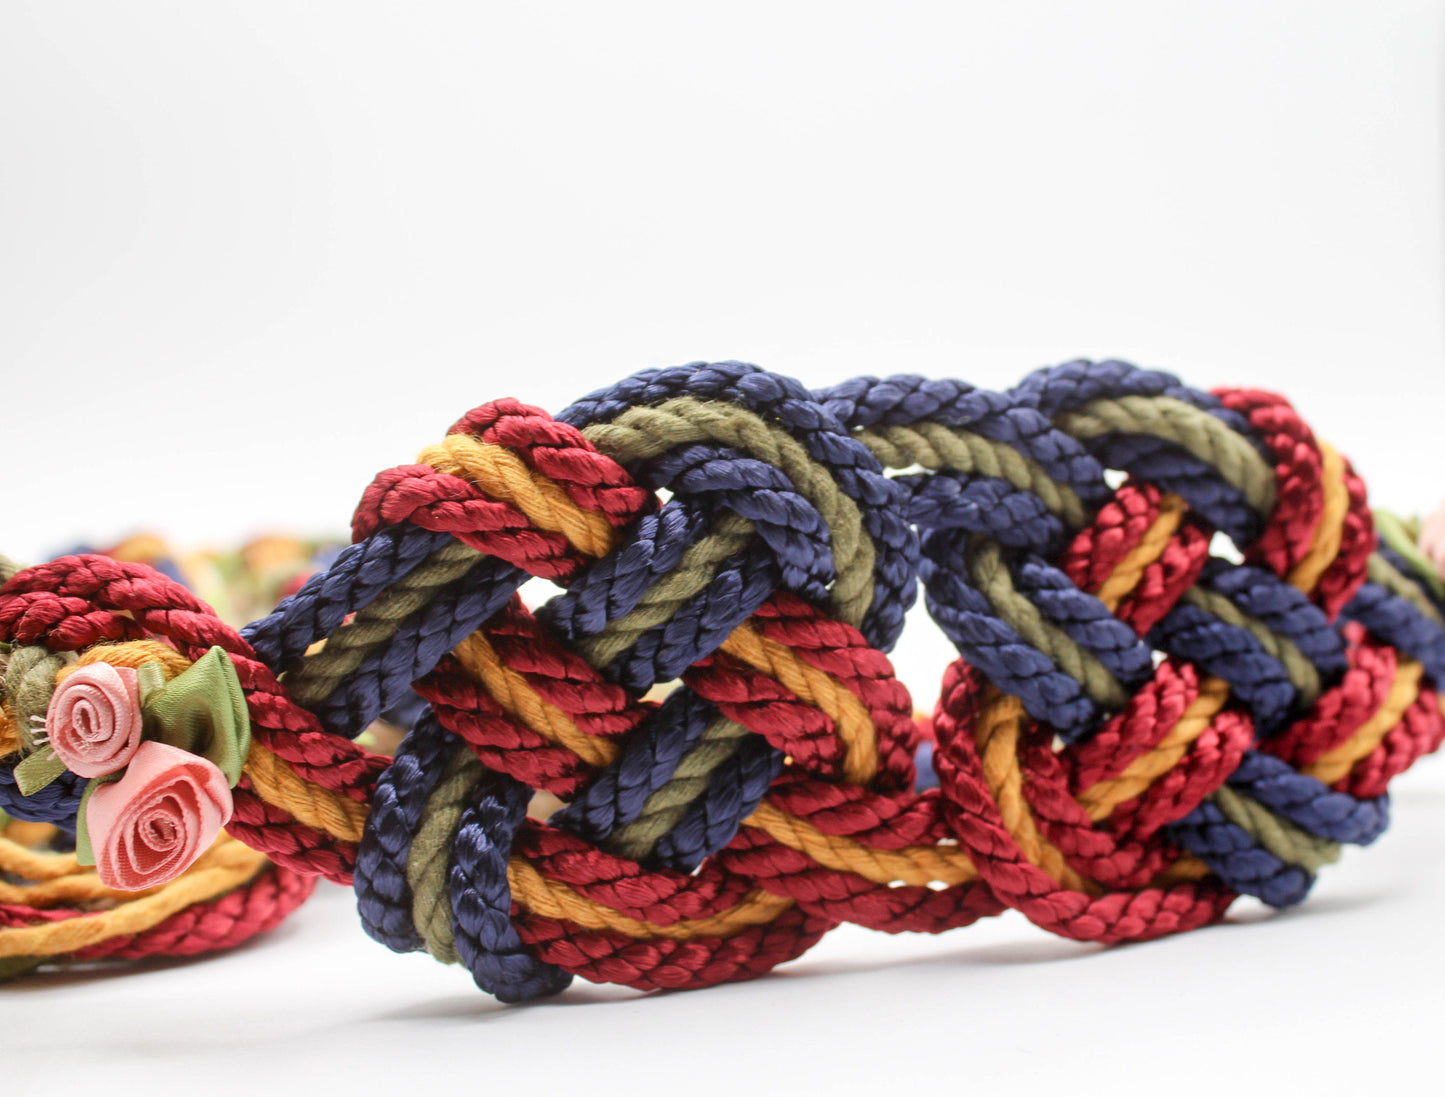 Hearts Entwined - Burgundy and Navy with Roses